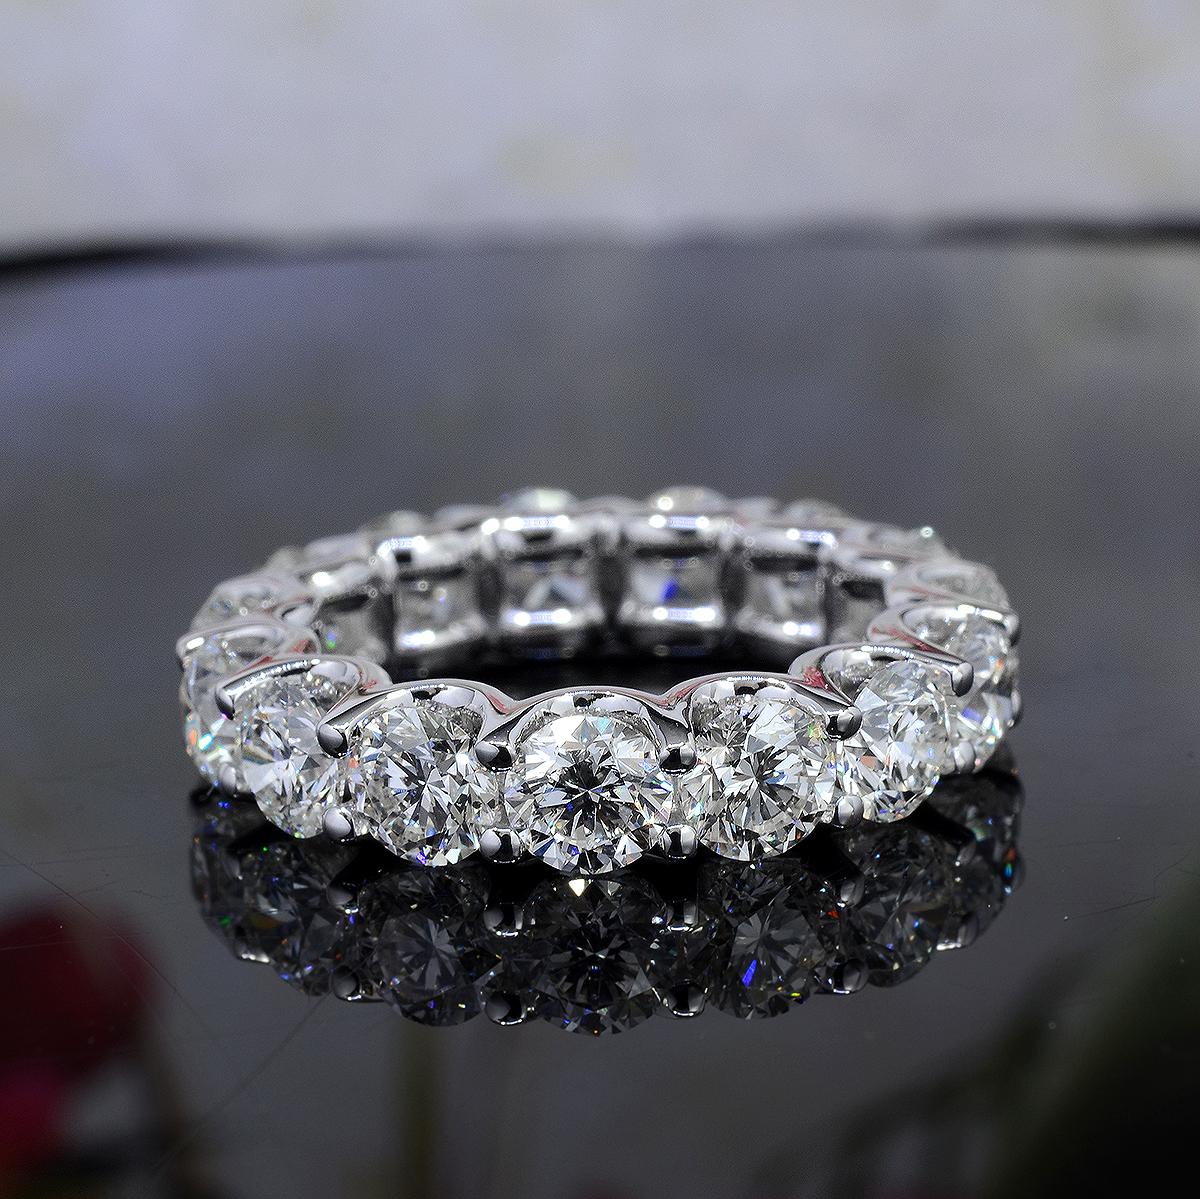 For Sale:  6 Carat Diamond Eternity Band Classic Round Cut G Color SI1 Clarity 18k Gold 2